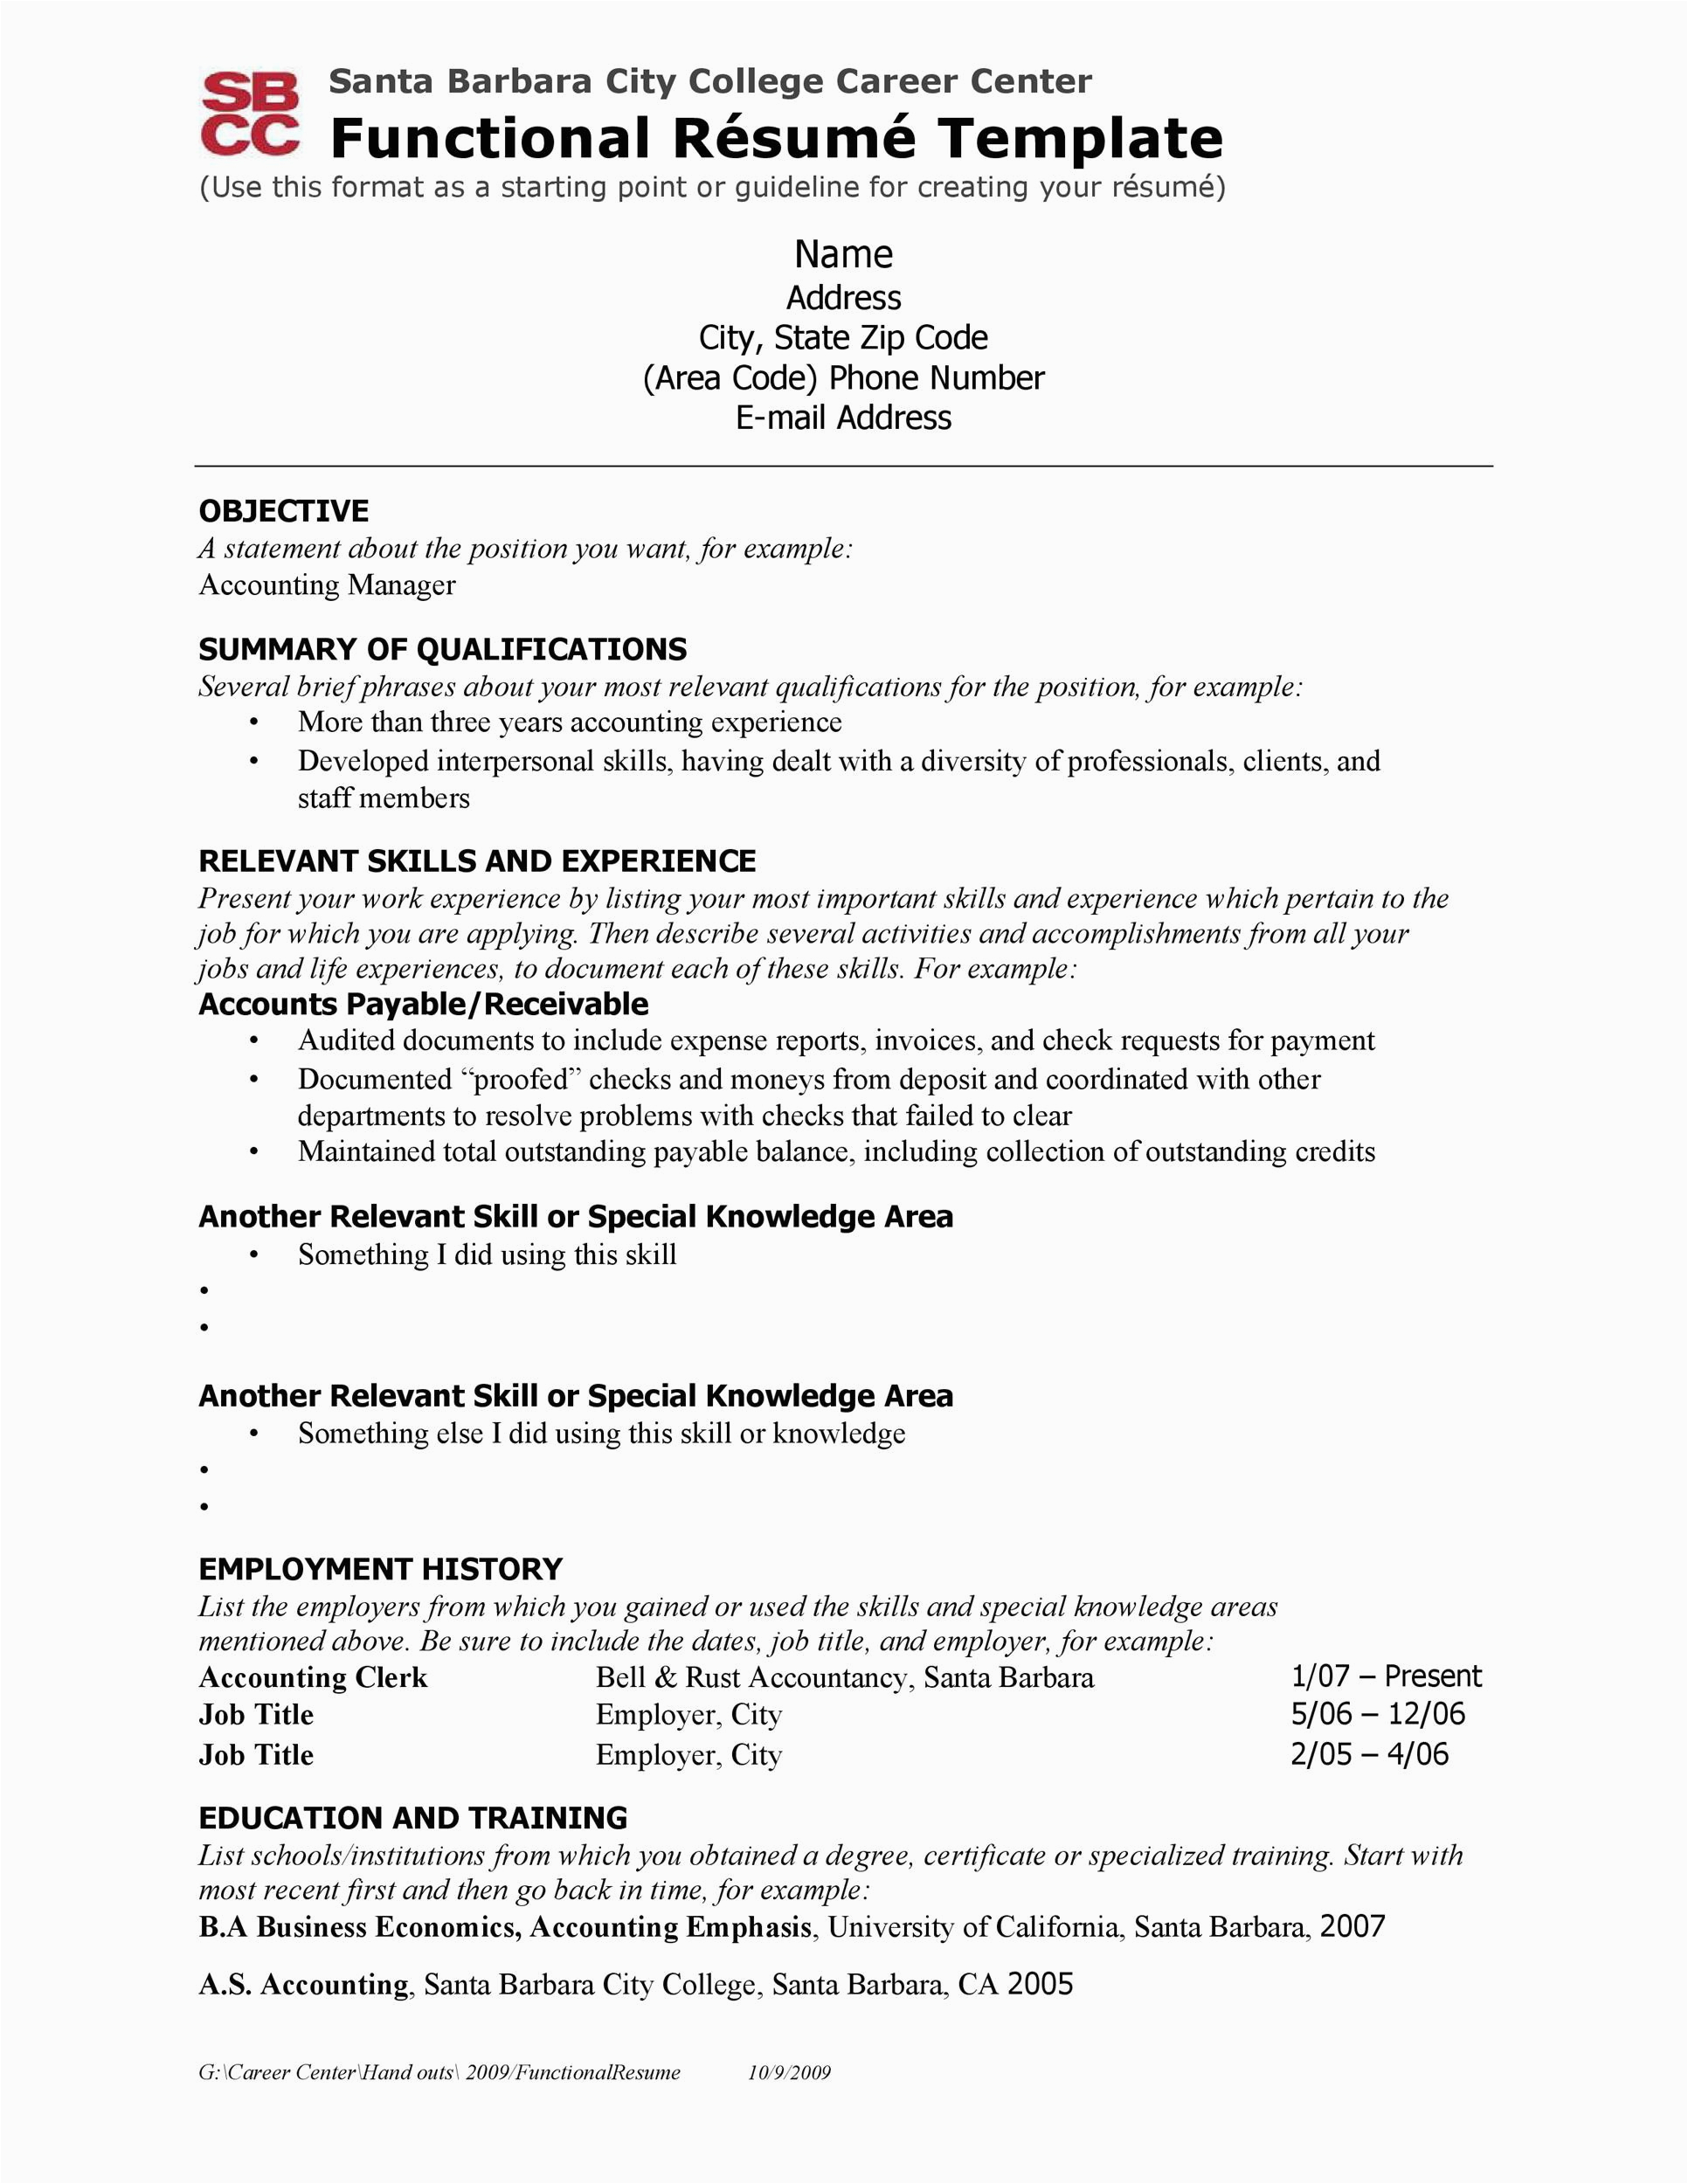 Download Resume Templates for College Students 50 College Student Resume Templates & format Templatelab